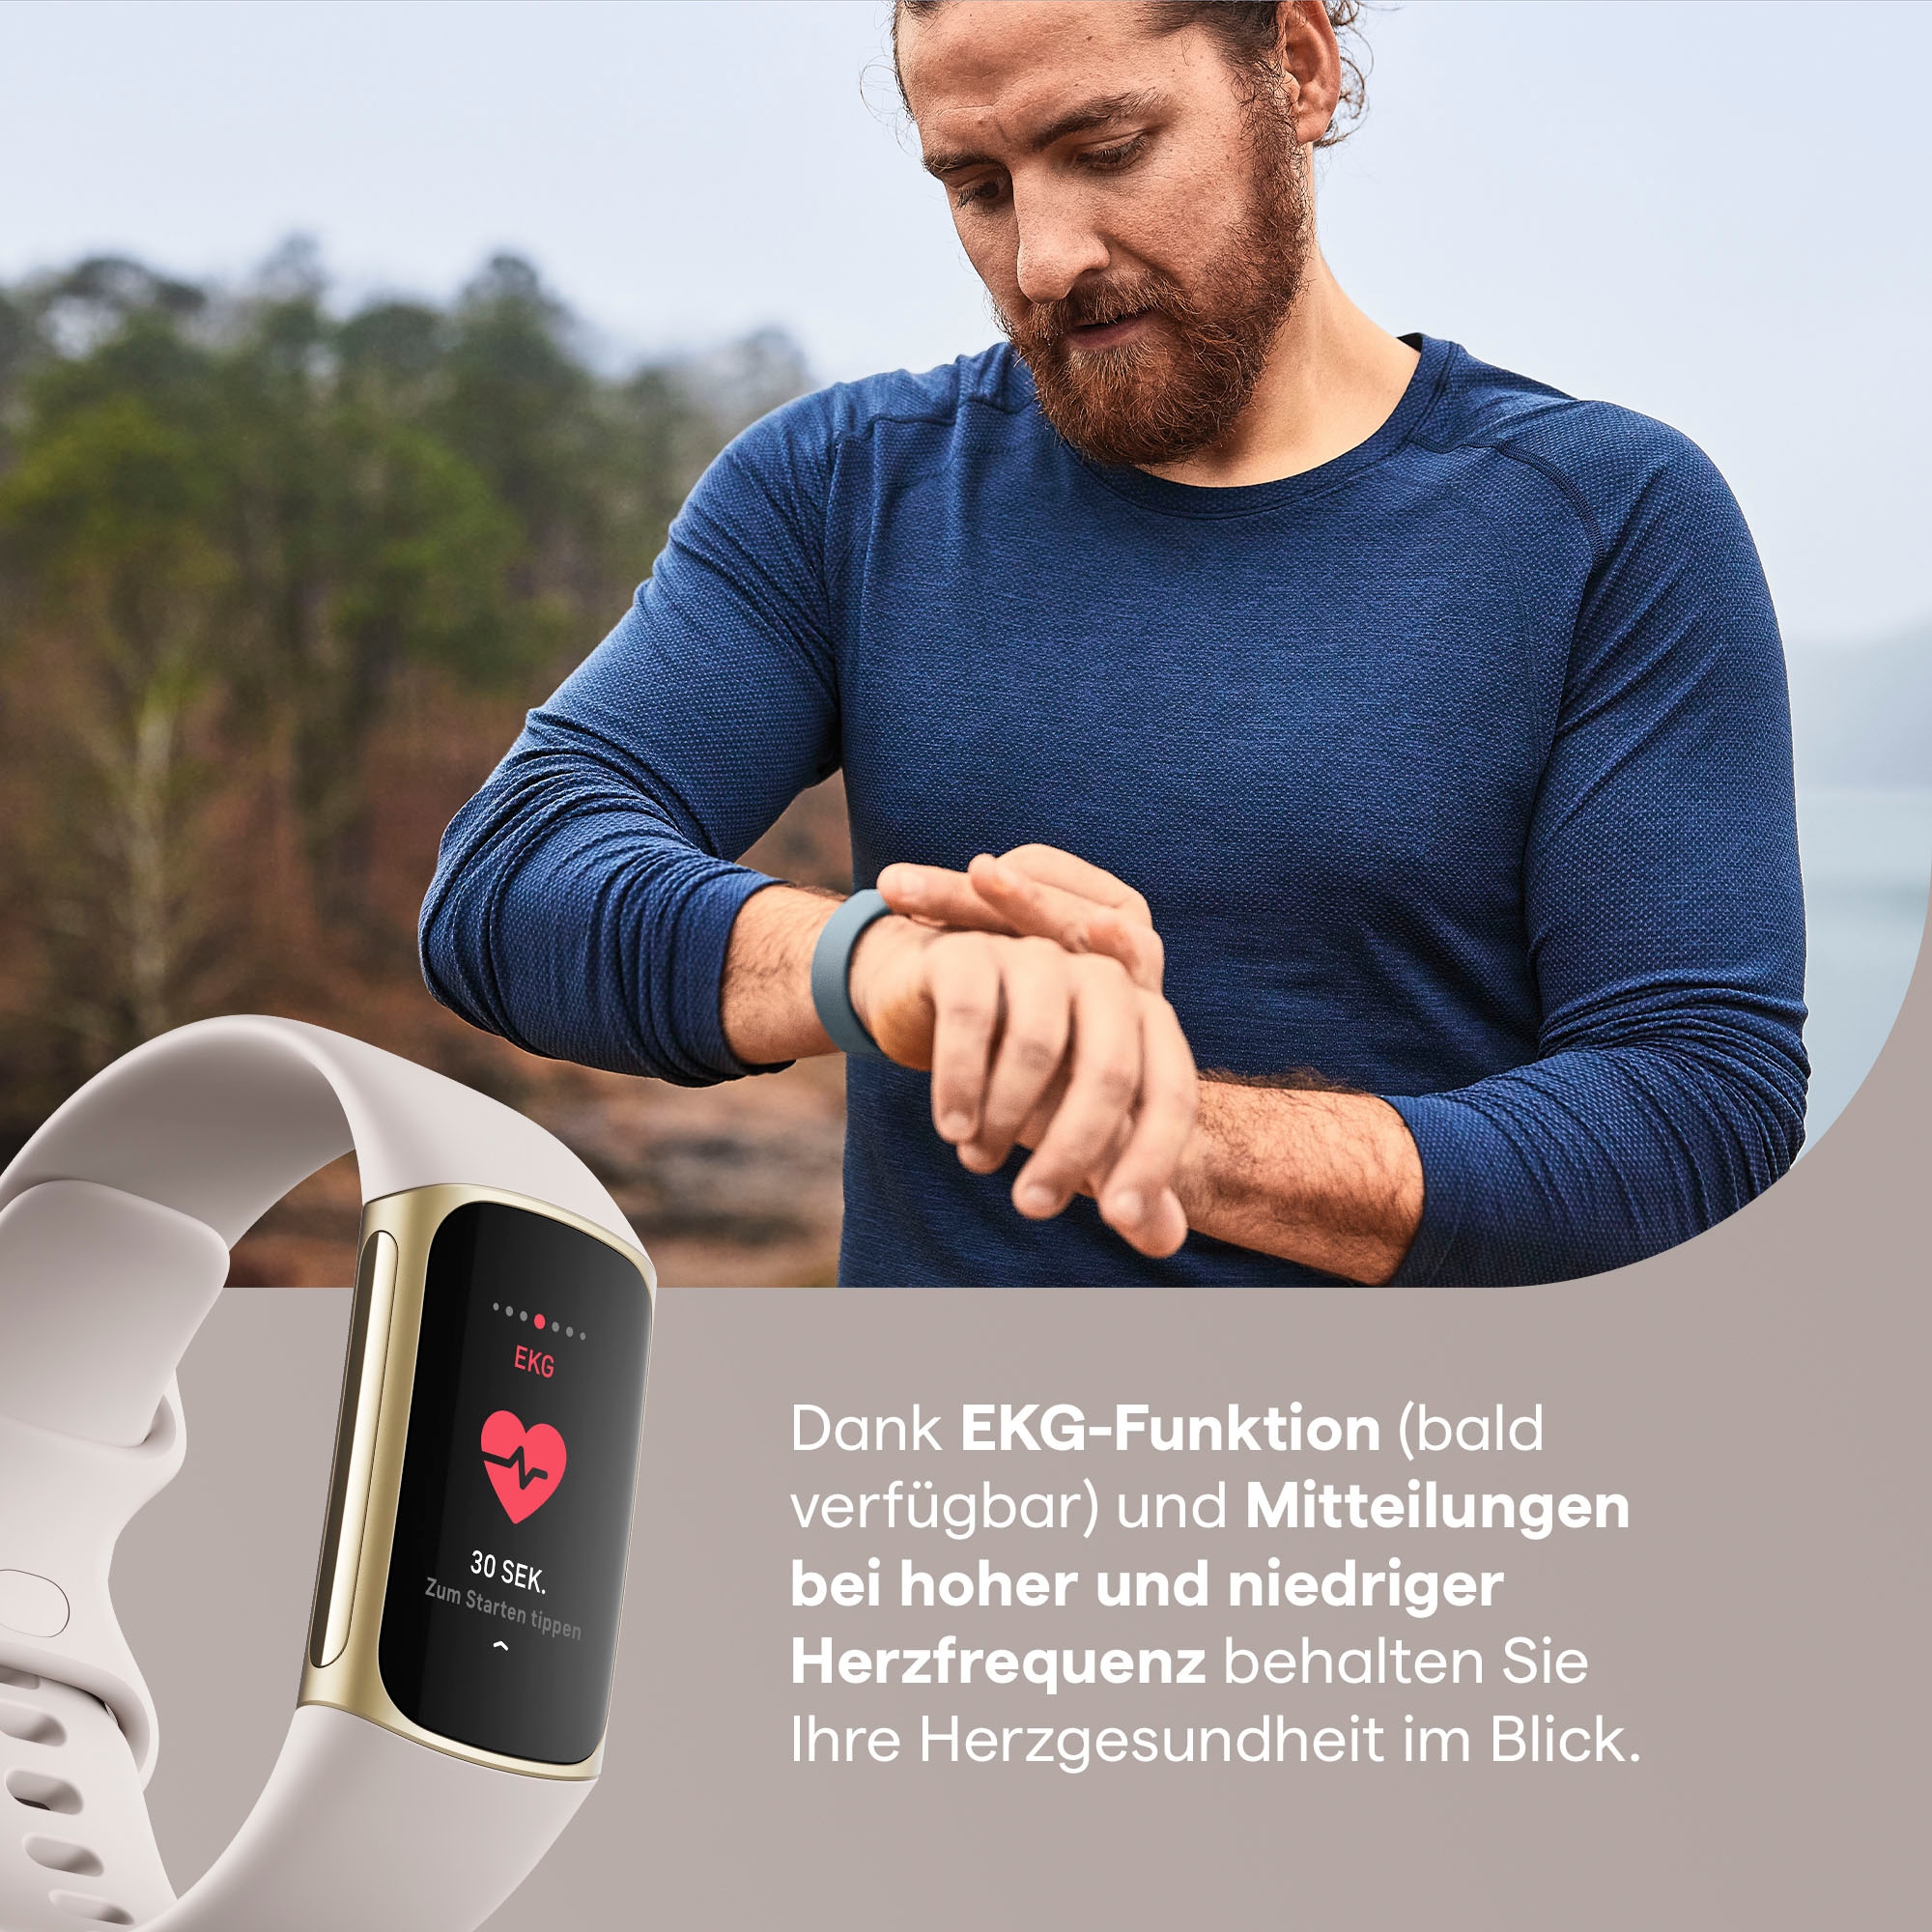 fitbit by Google Smartwatch »Charge Premium) 6 (FitbitOS5 Fitbit kaufen bei inkl. 5«, jetzt Monate OTTO